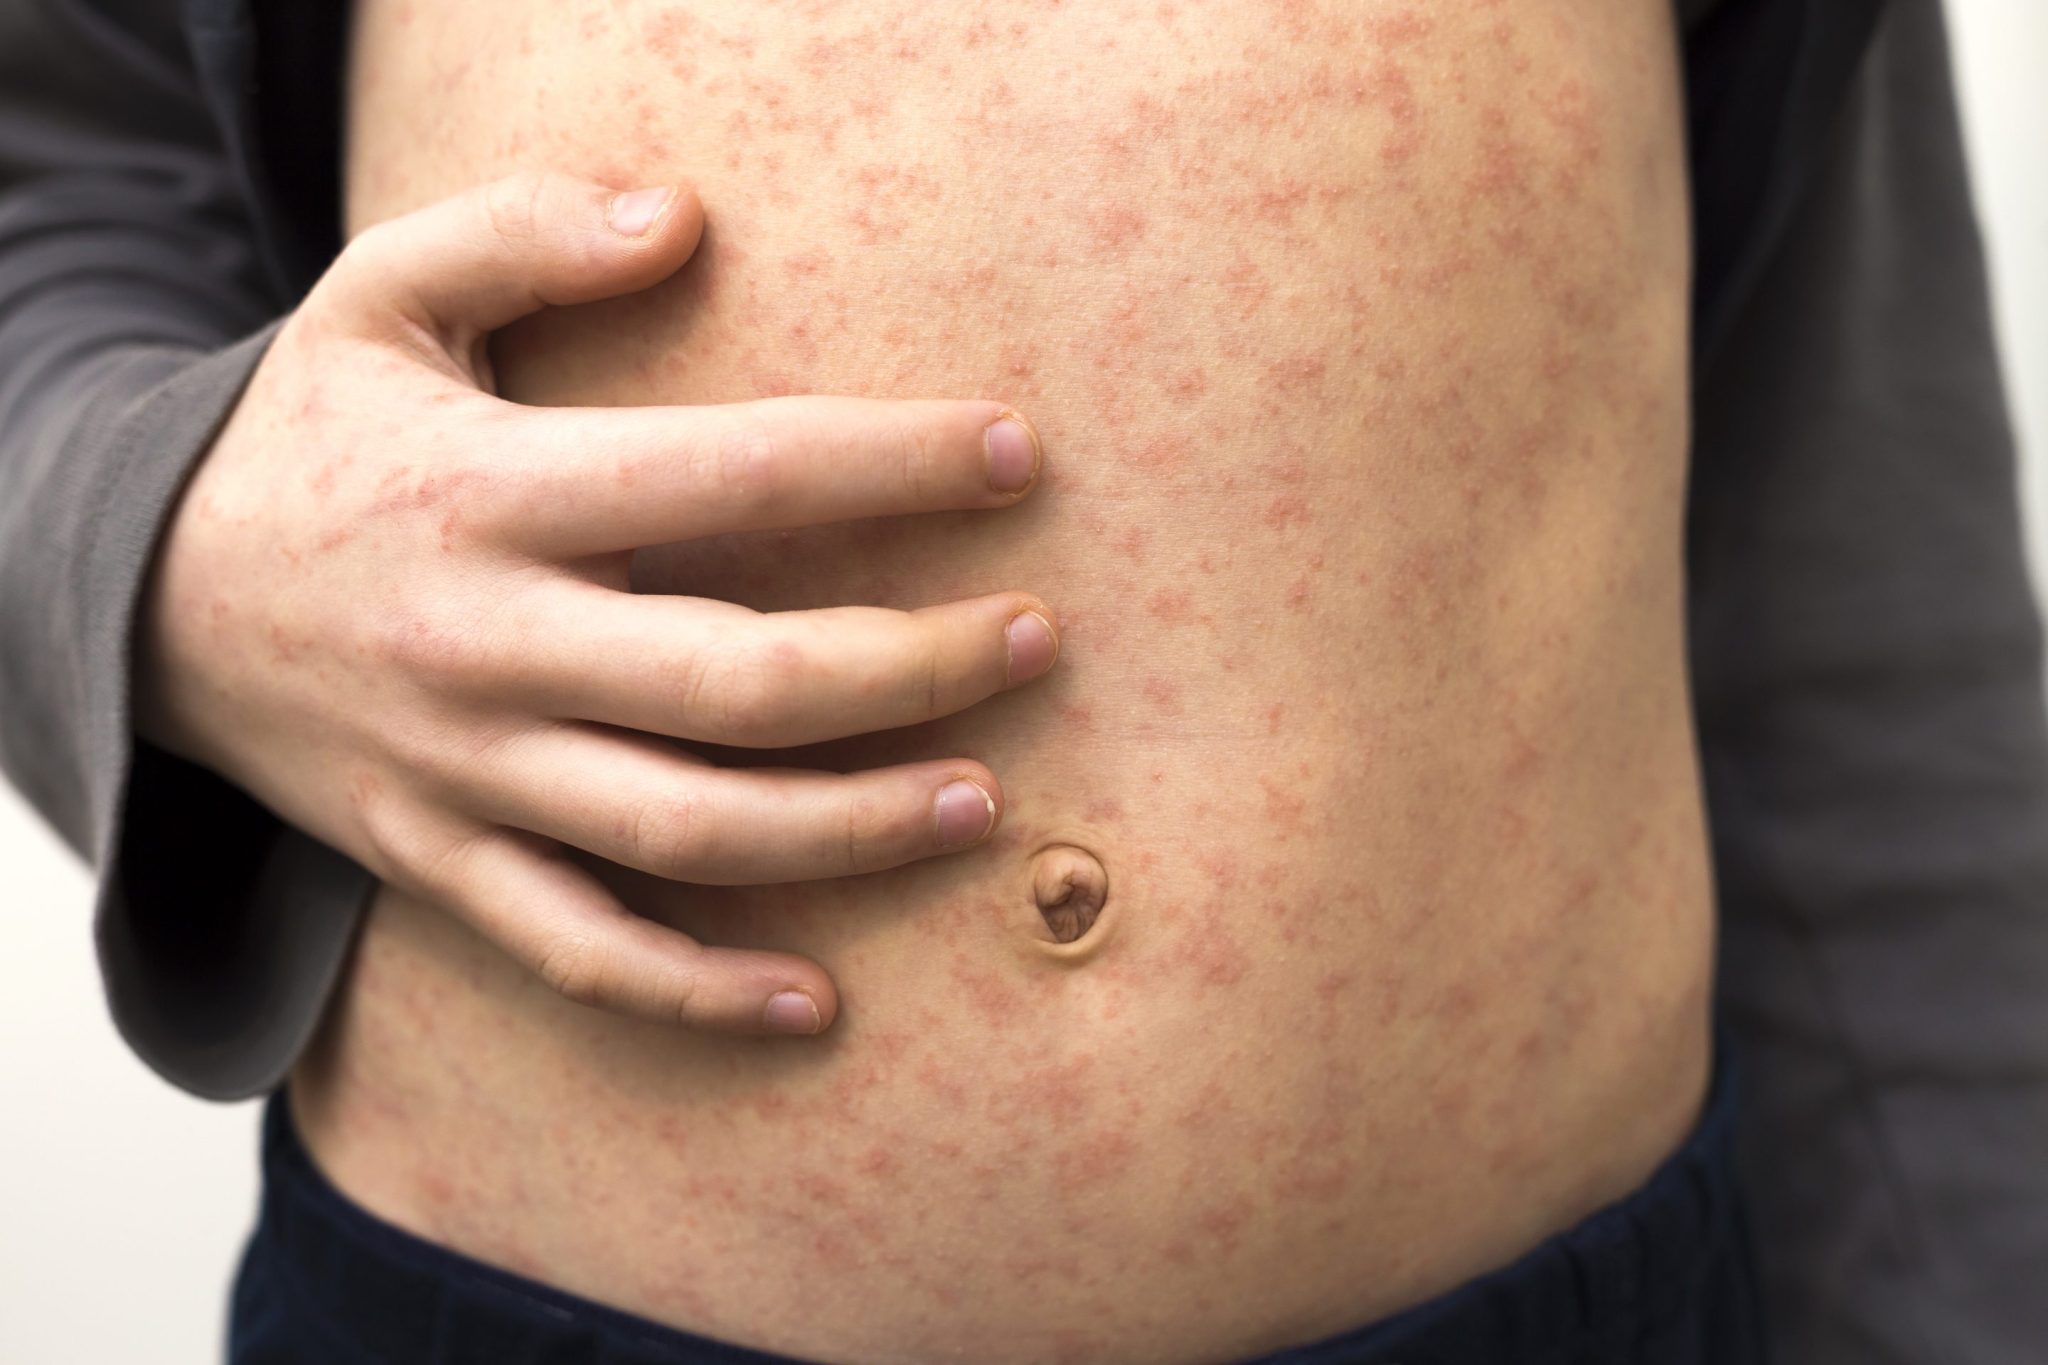 Measles cases are mounting in the US as the UK declares a ‘national incident’ over the disease. What parents need to know to keep their kids safe